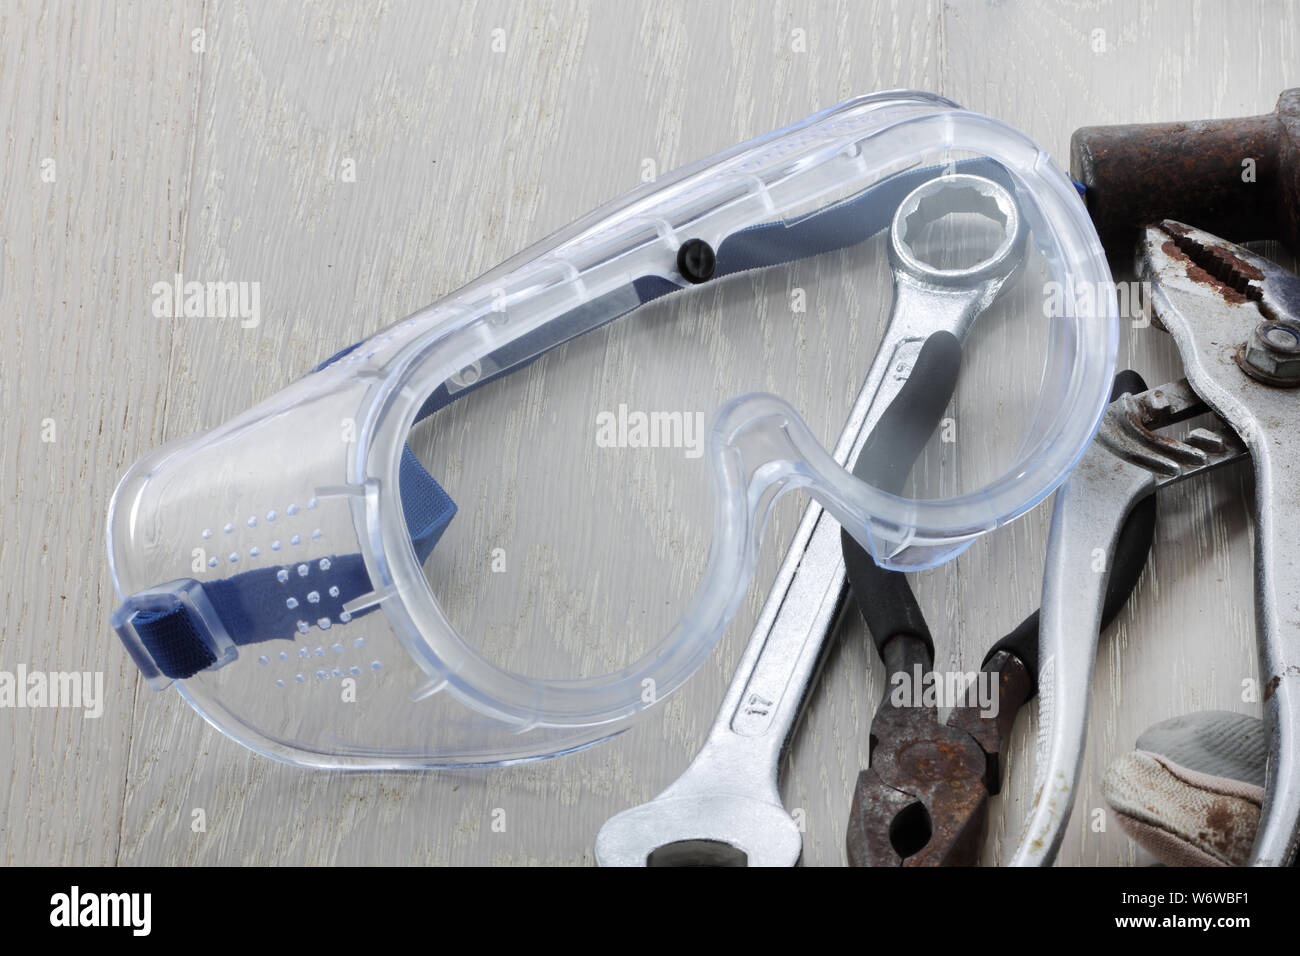 A pair of safety goggles / glasses on a bench with tools Stock Photo